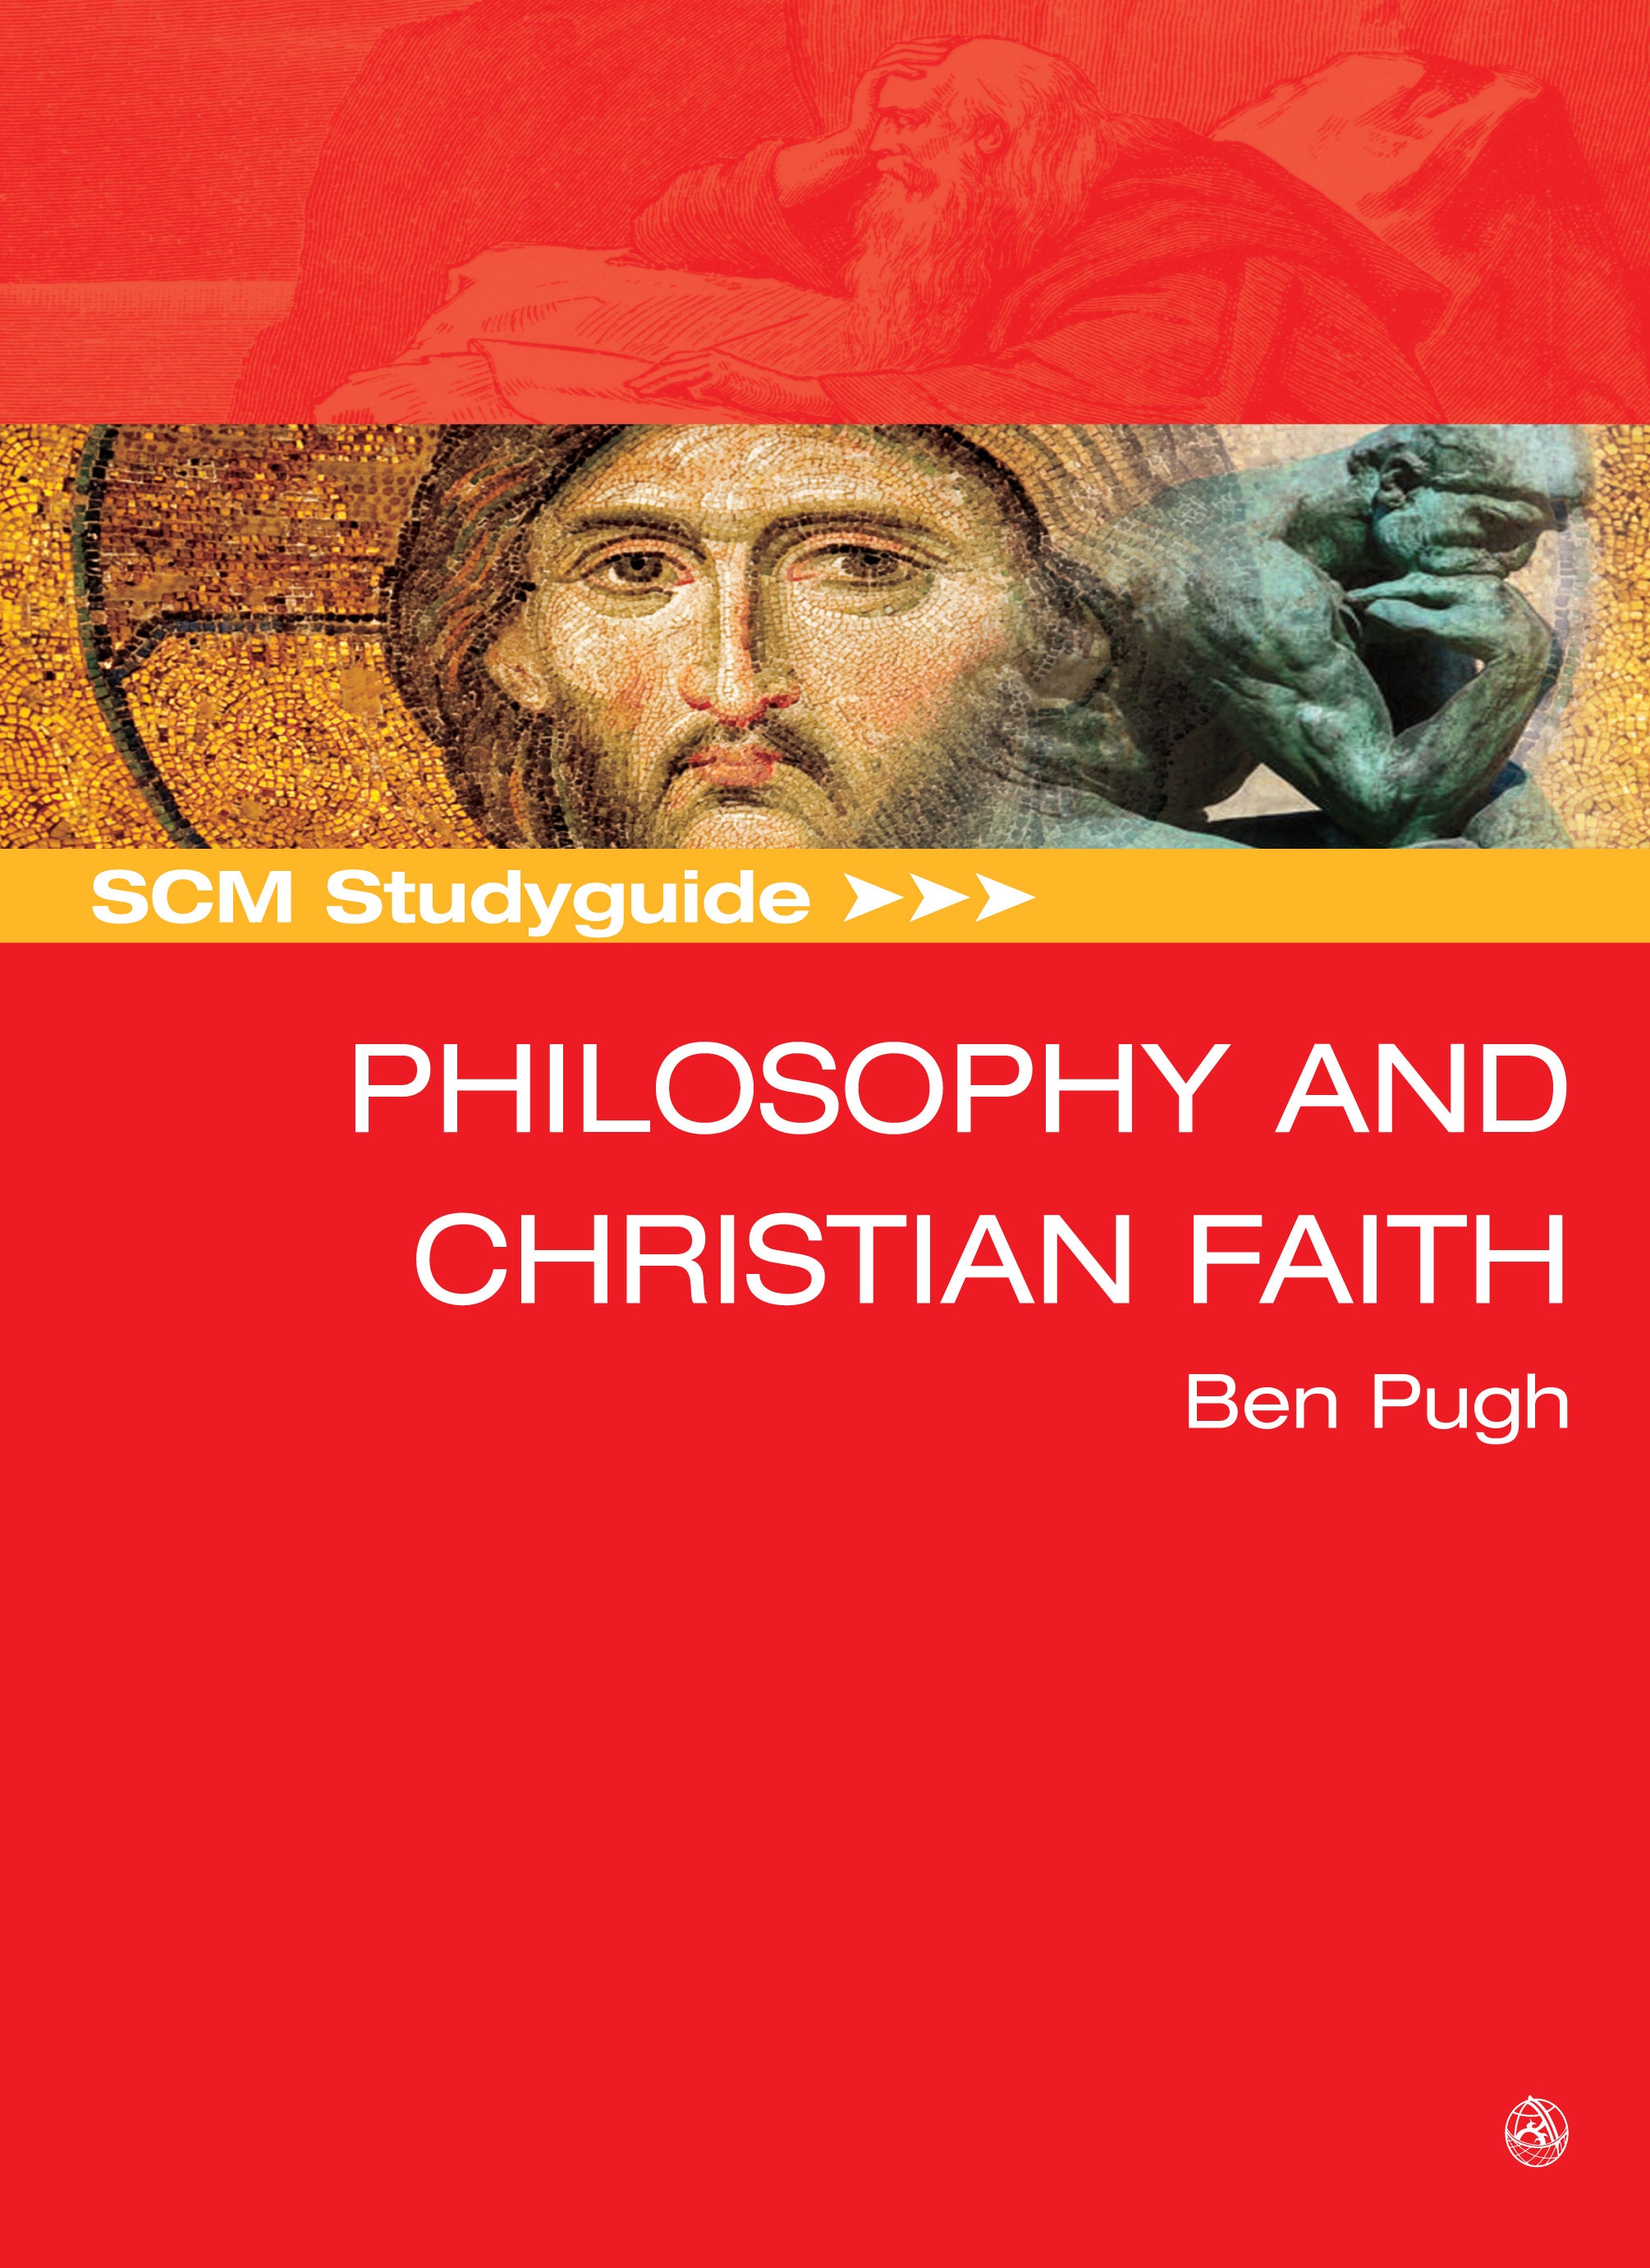 Image of SCM Studyguide: Philosophy And The Christian Faith other